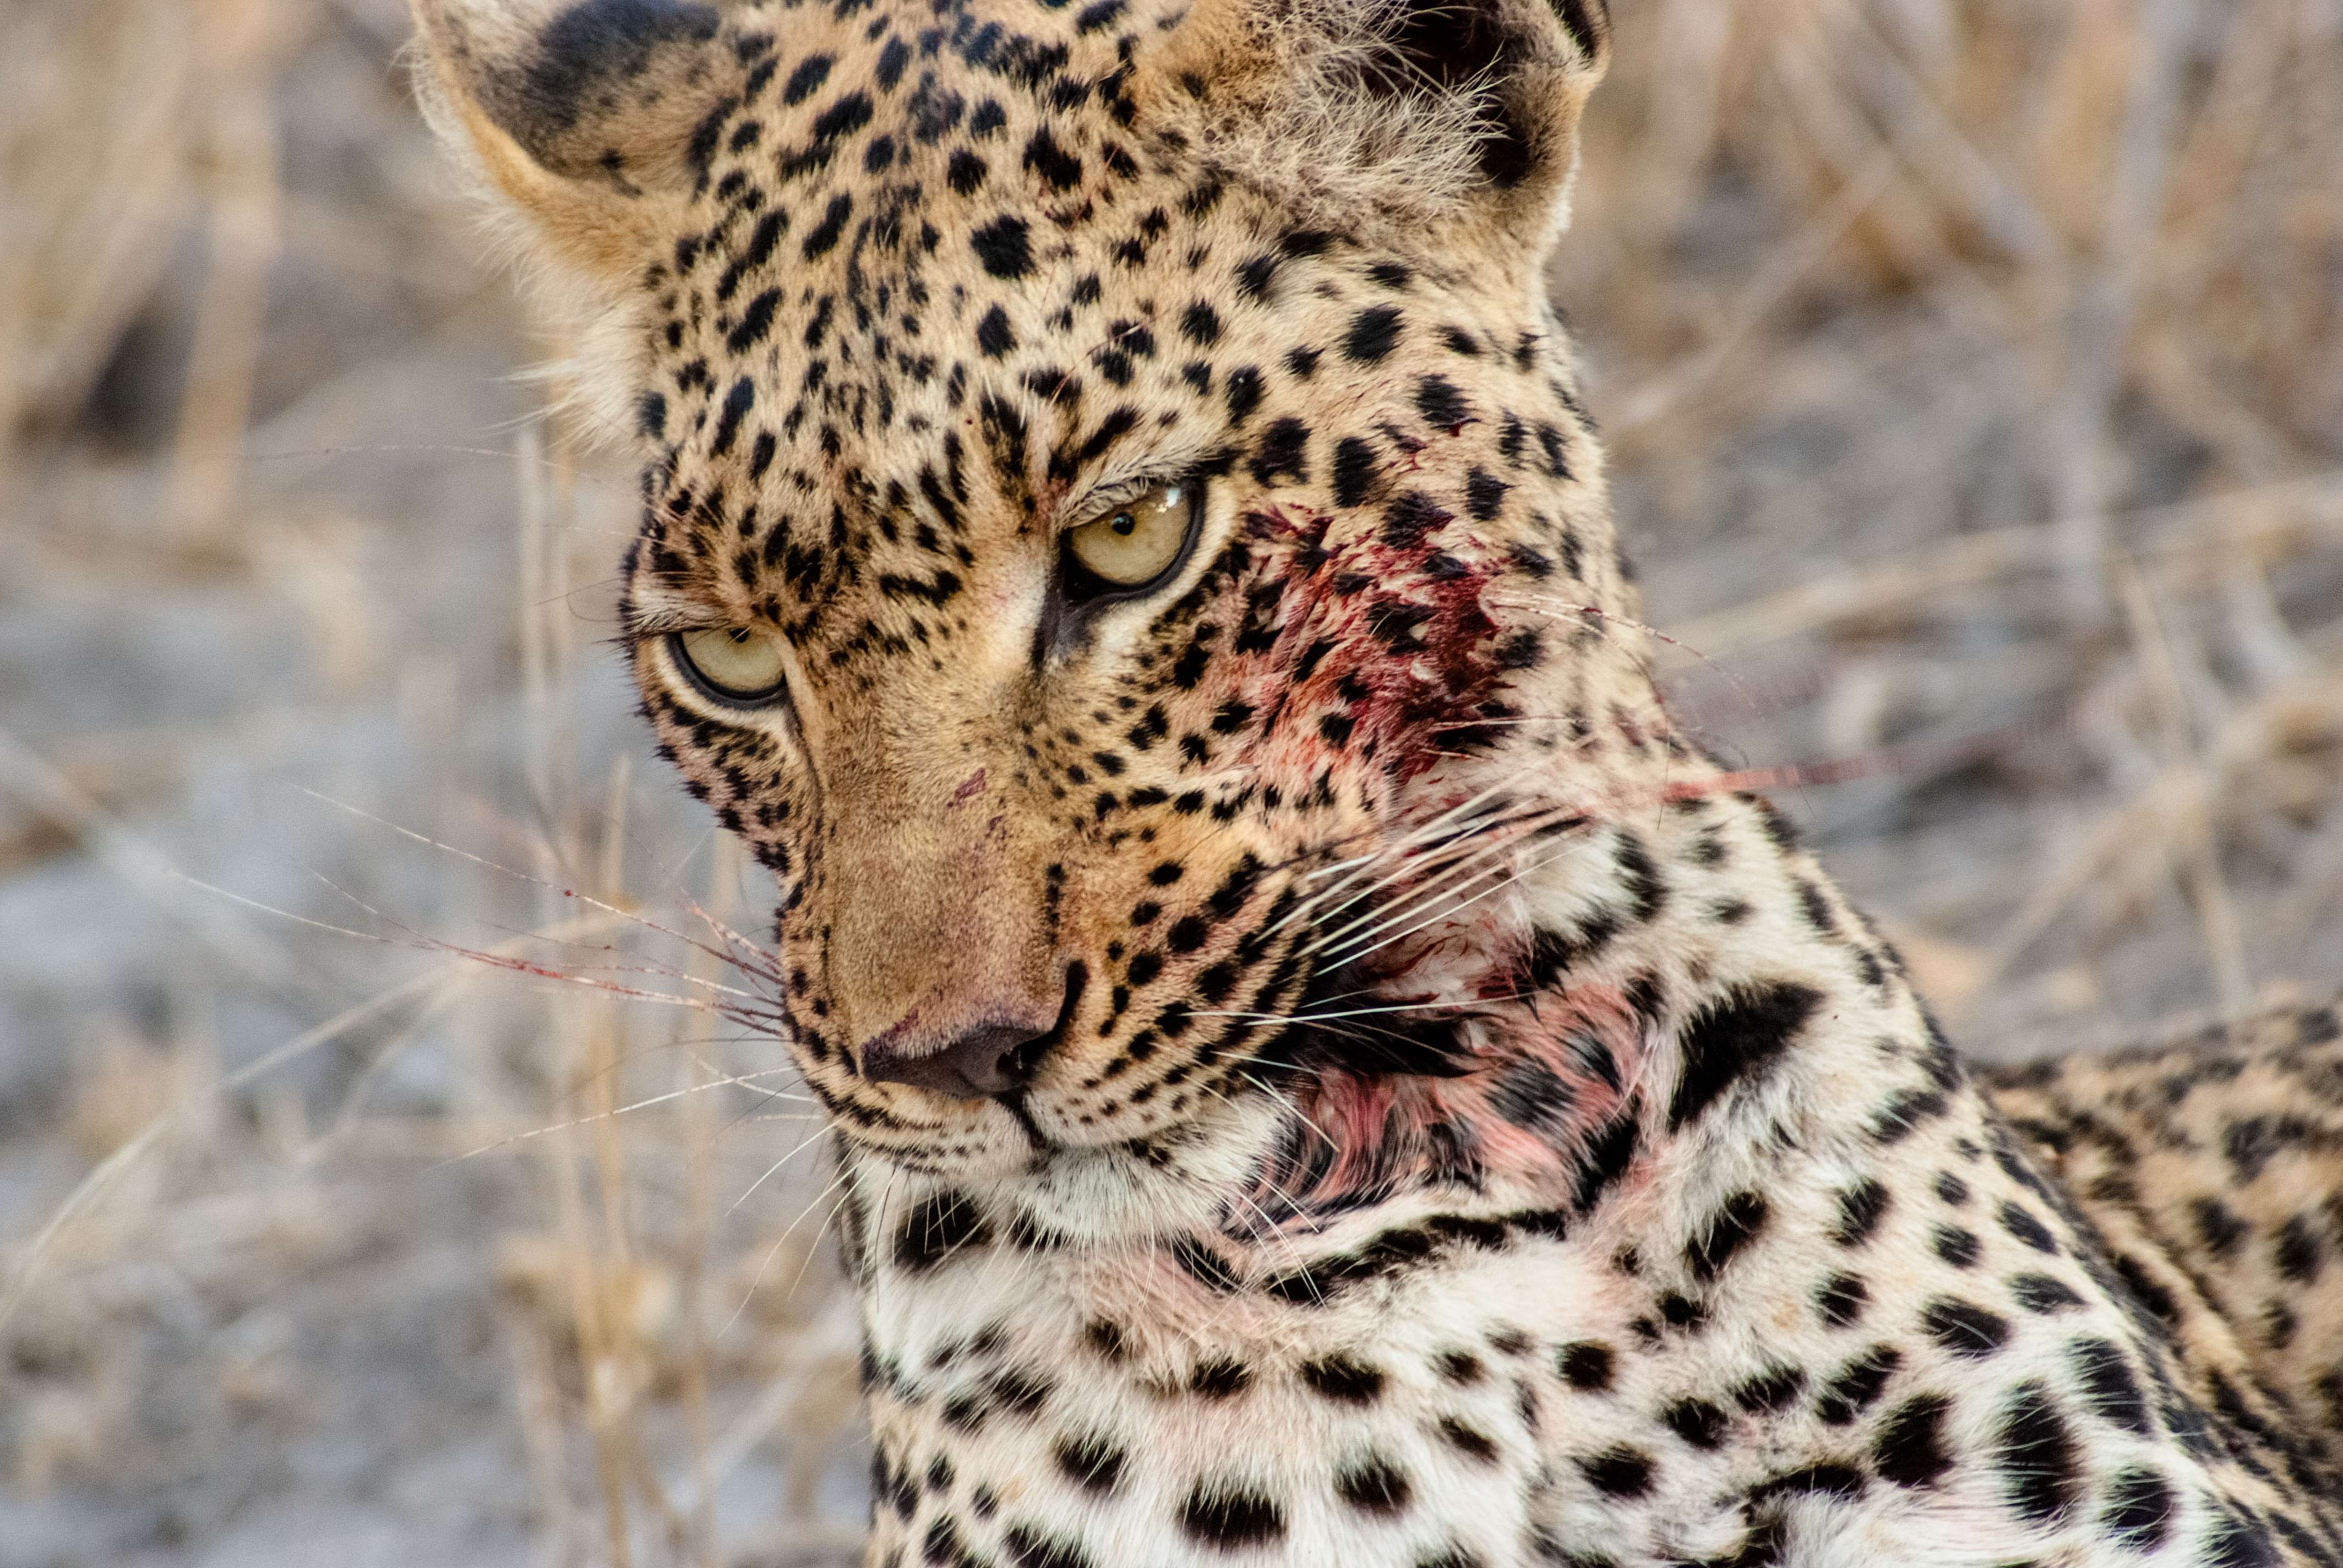 After removing a morsel from her kill, a leopard cleans her bloody face. © WWF-US/Rachel Kramer